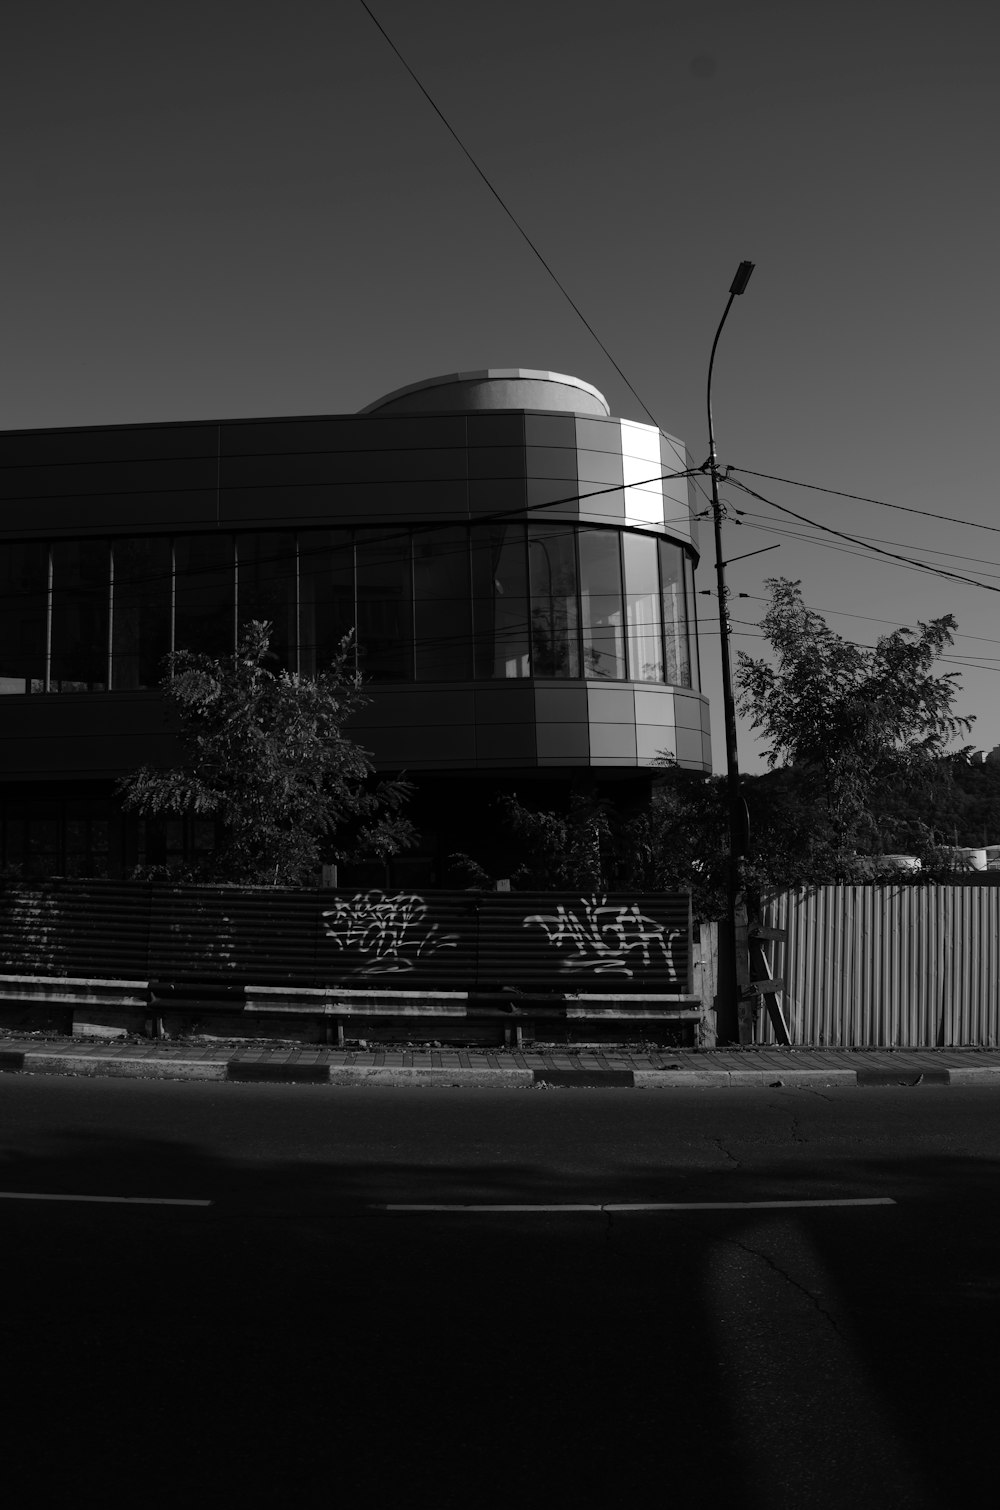 a black and white photo of a building with graffiti on it